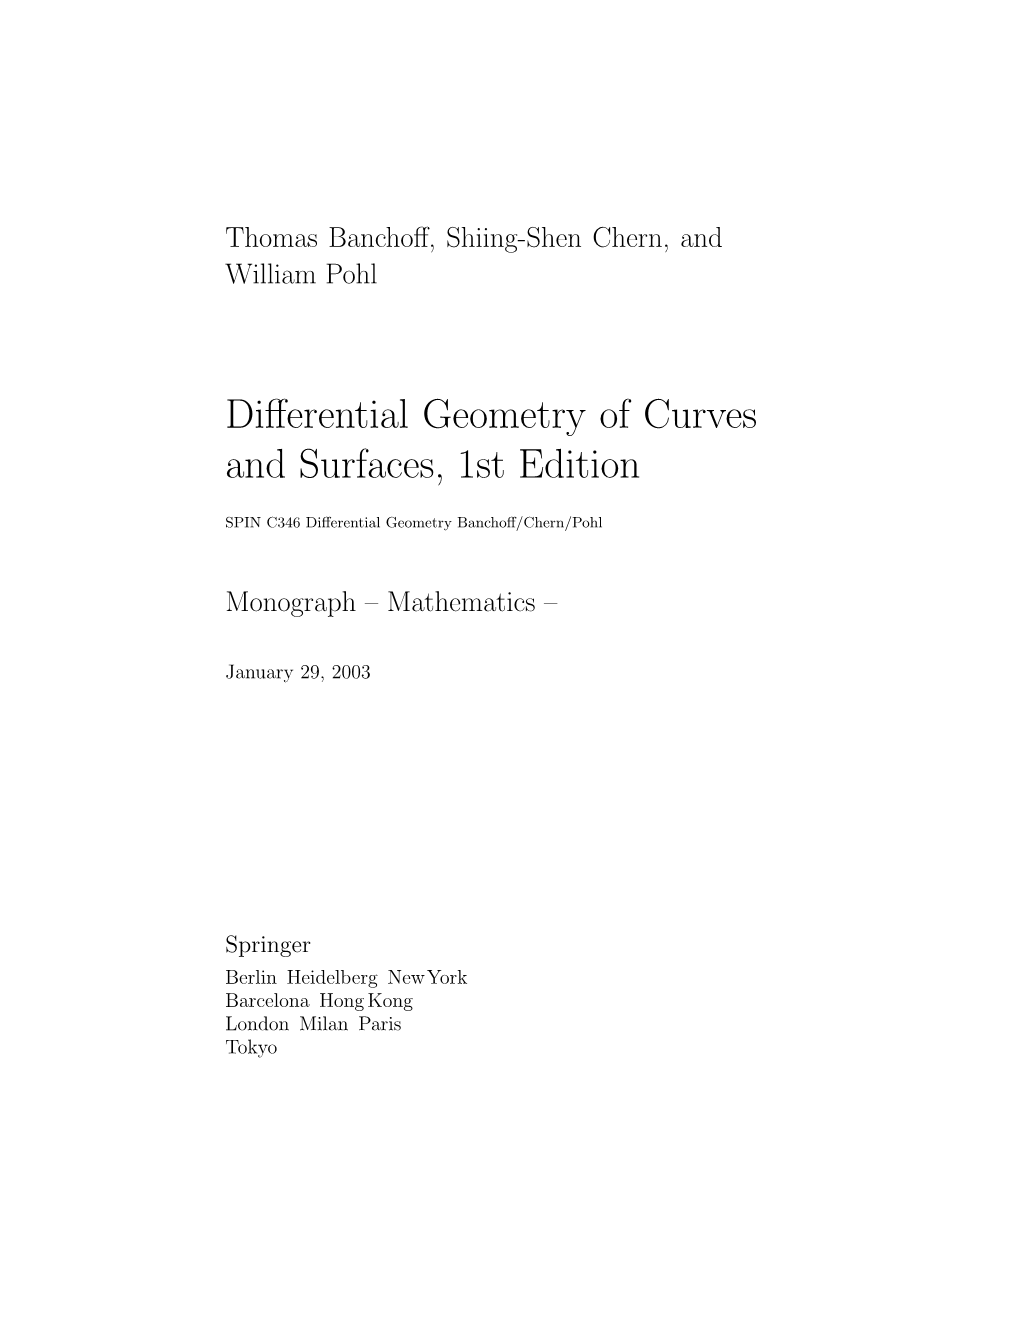 Differential Geometry of Curves and Surfaces, 1St Edition